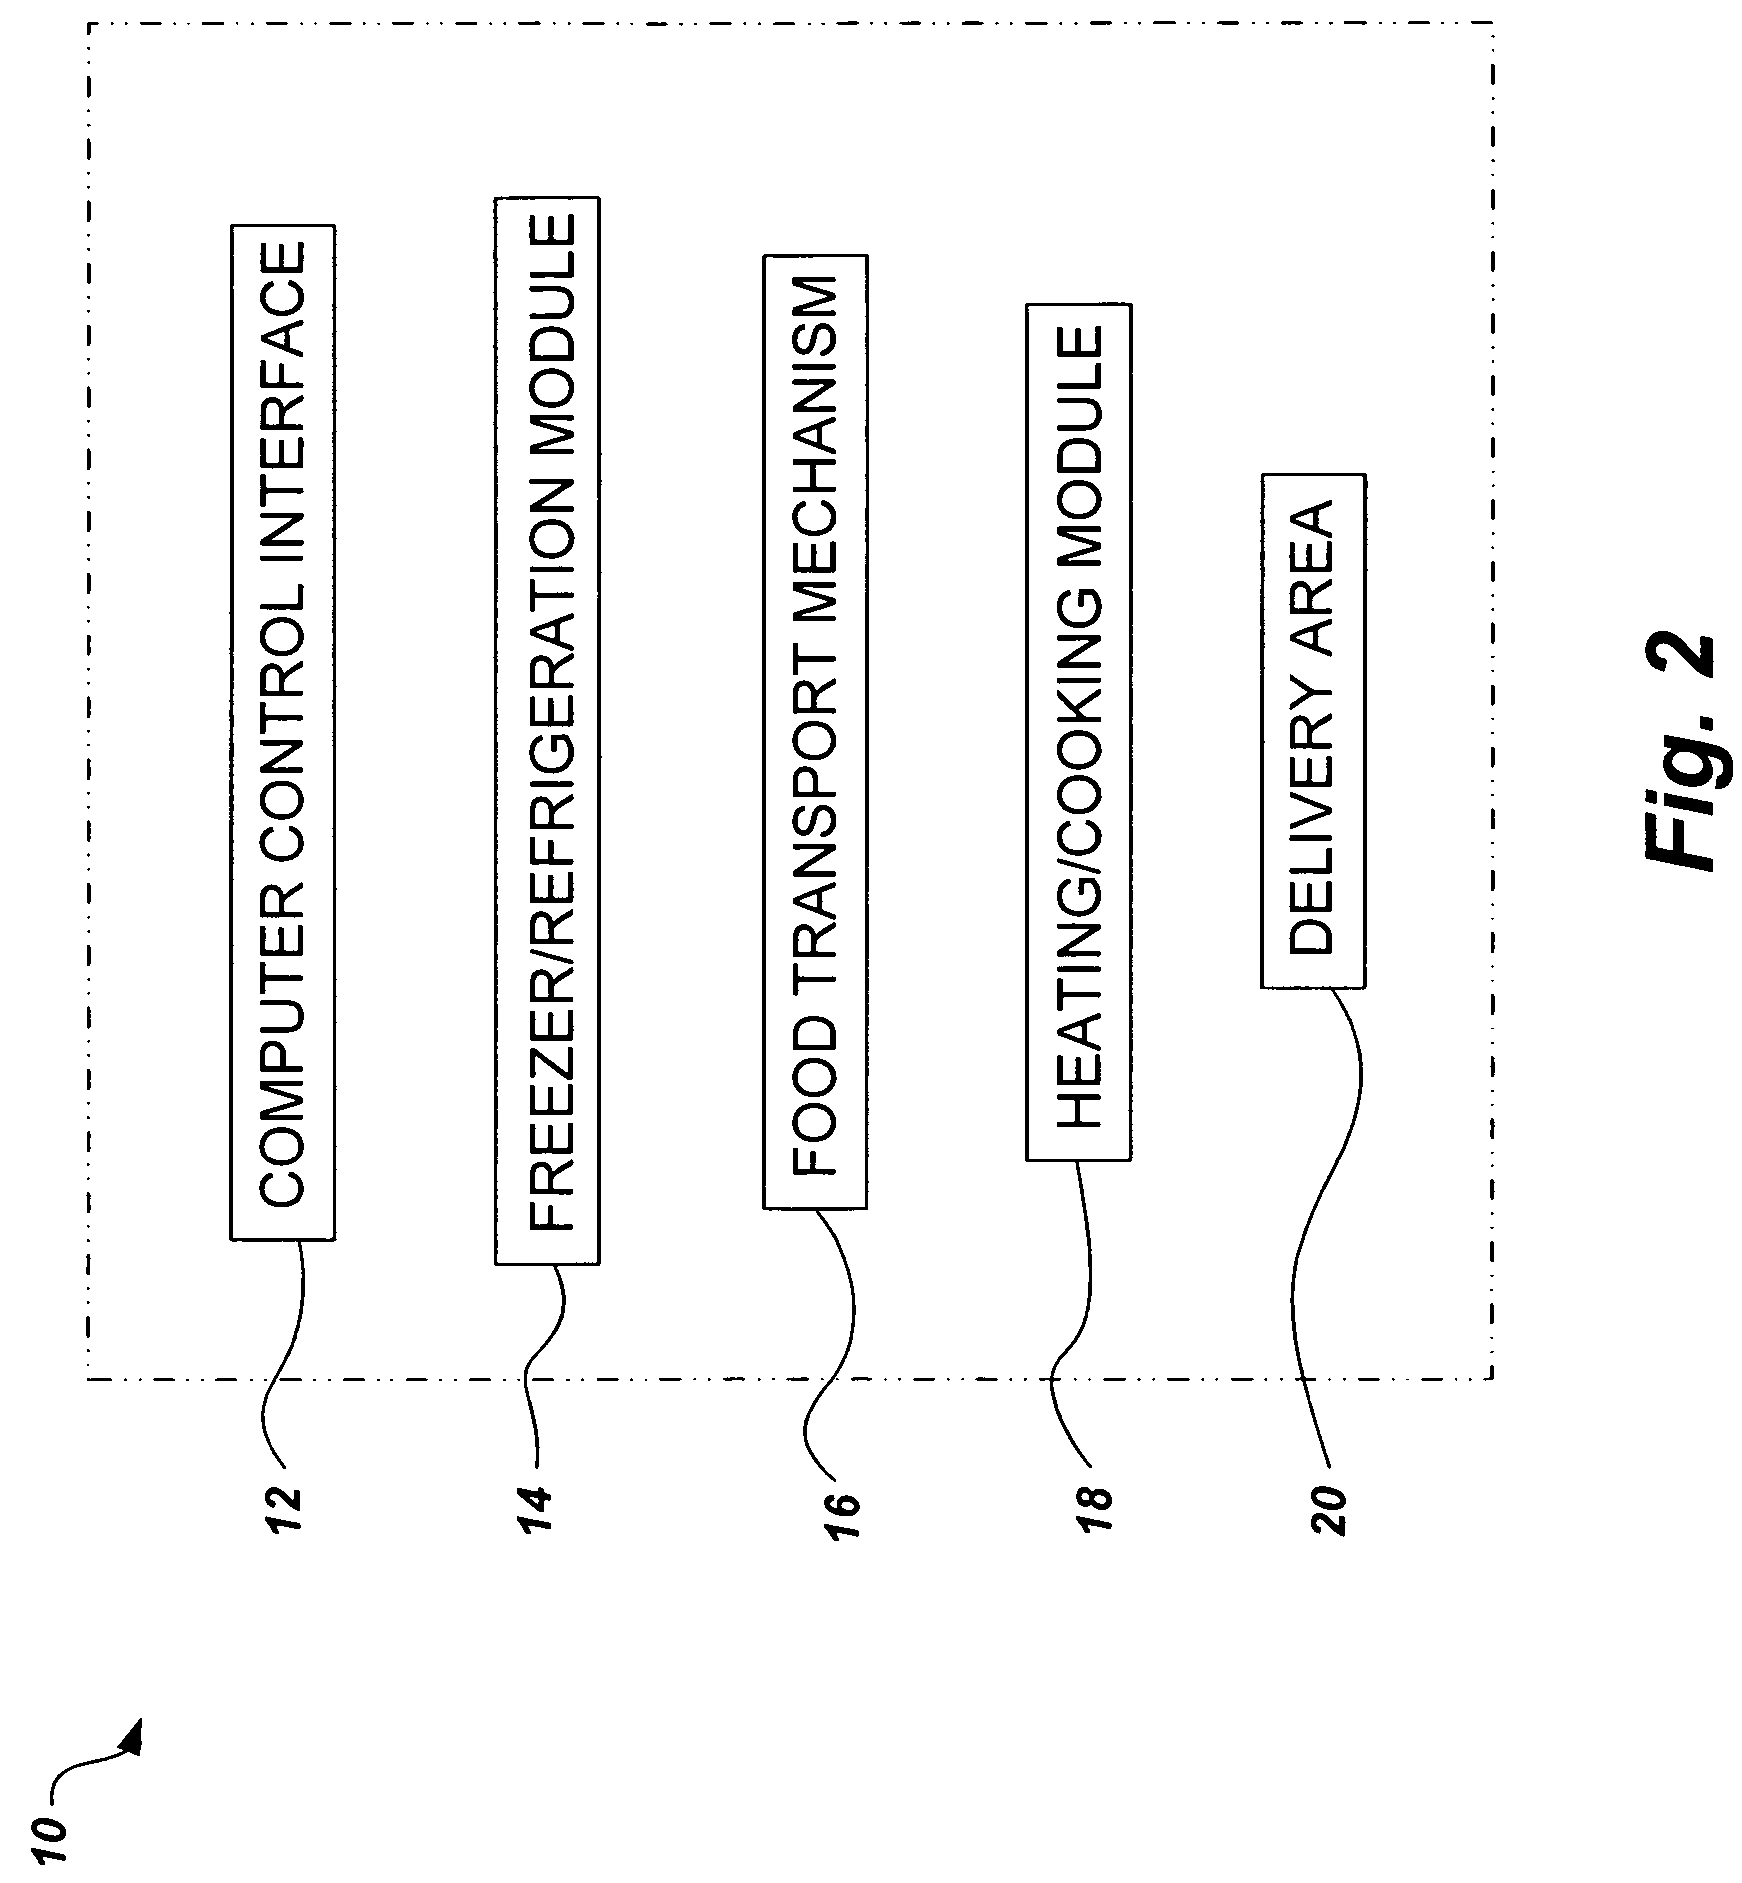 System of food storage preparation and delivery in finished cooked state